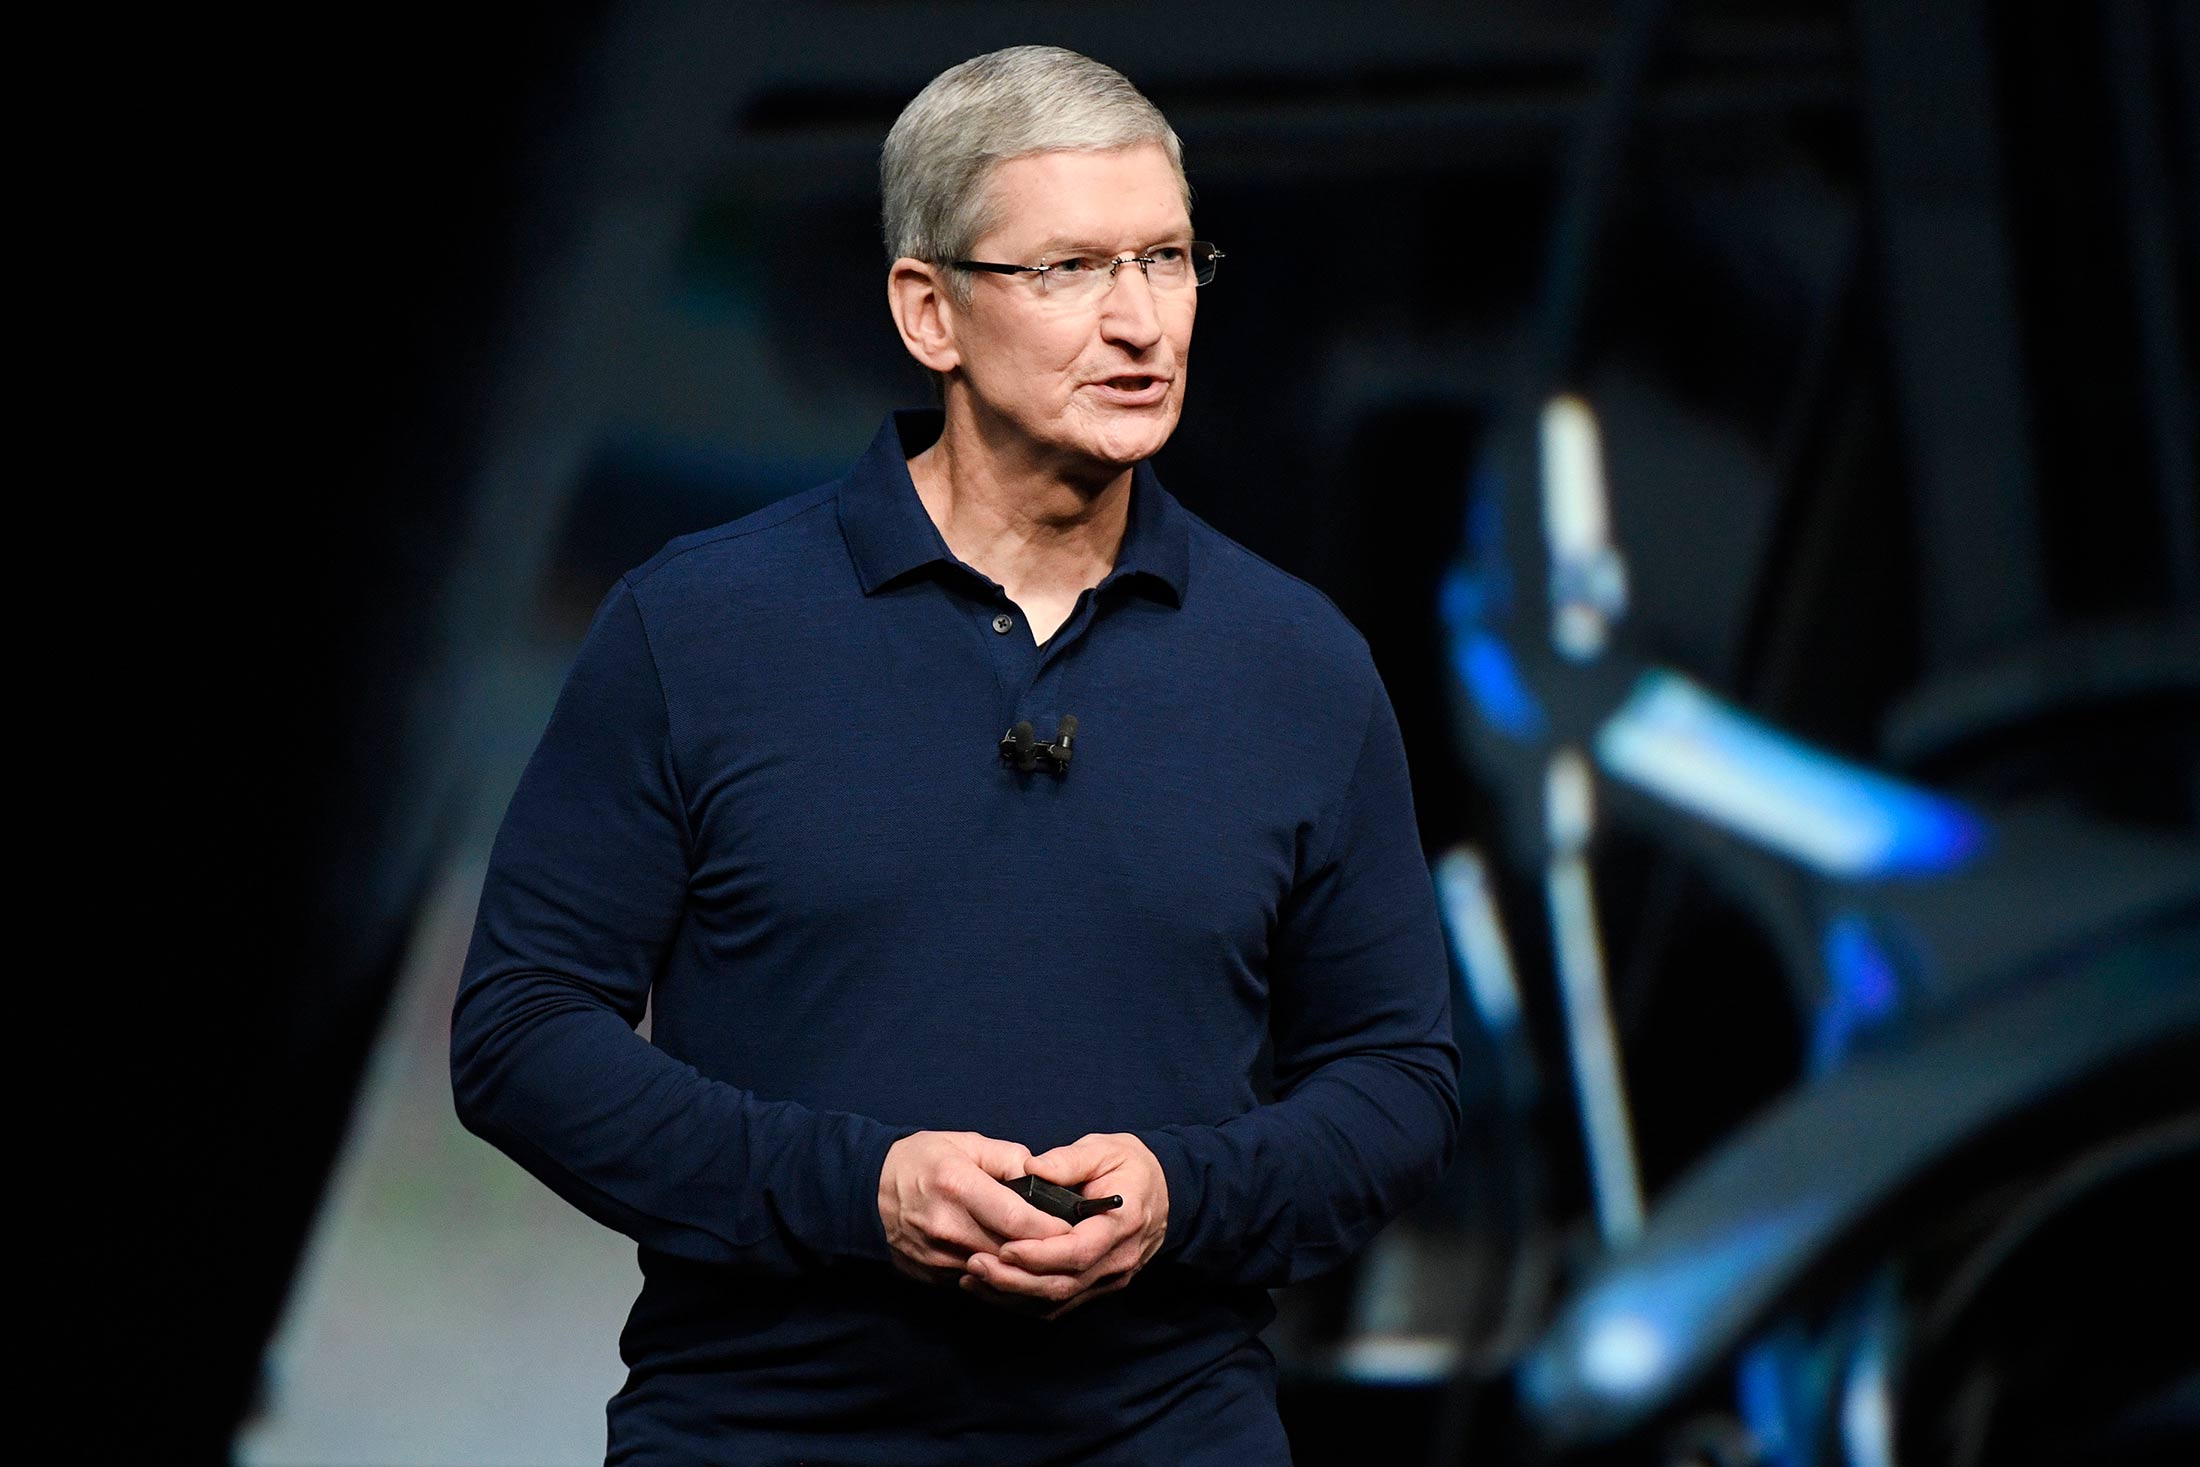 Tim Cook, chief executive officer of Apple Inc.
